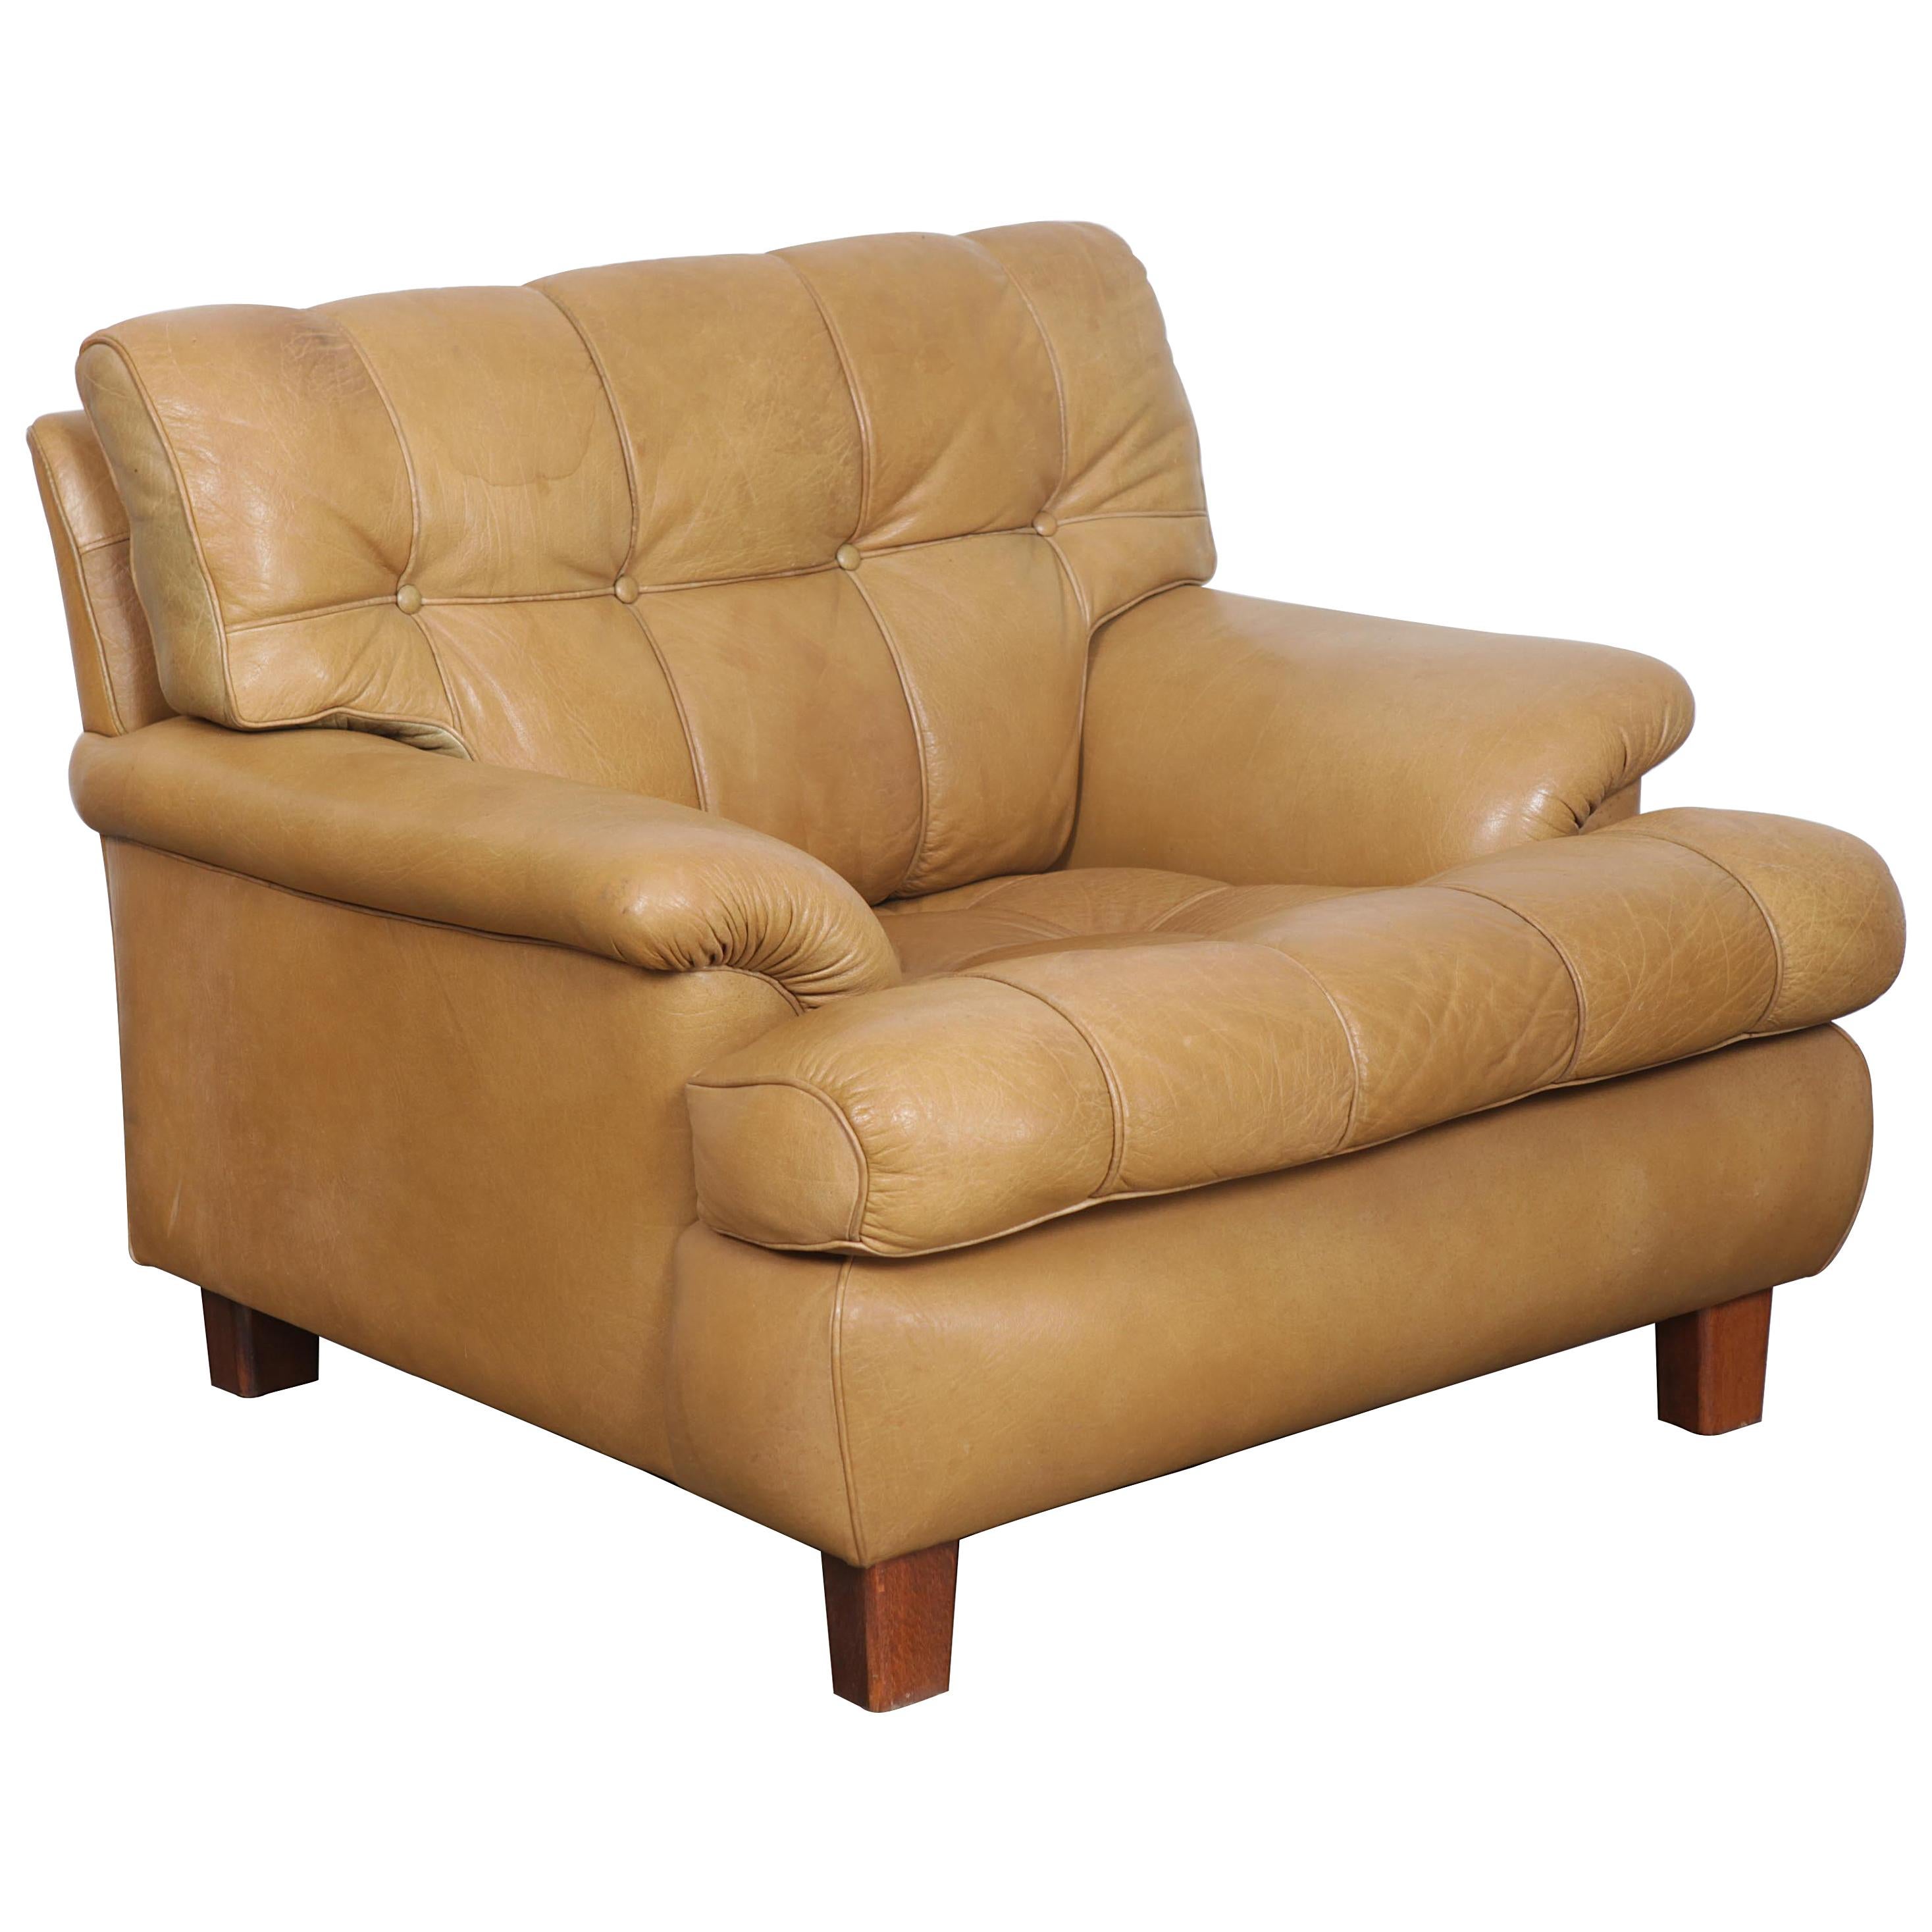 Arne Norell Tan Leather Tufted and Paneled Lounge Chair by Norell AB